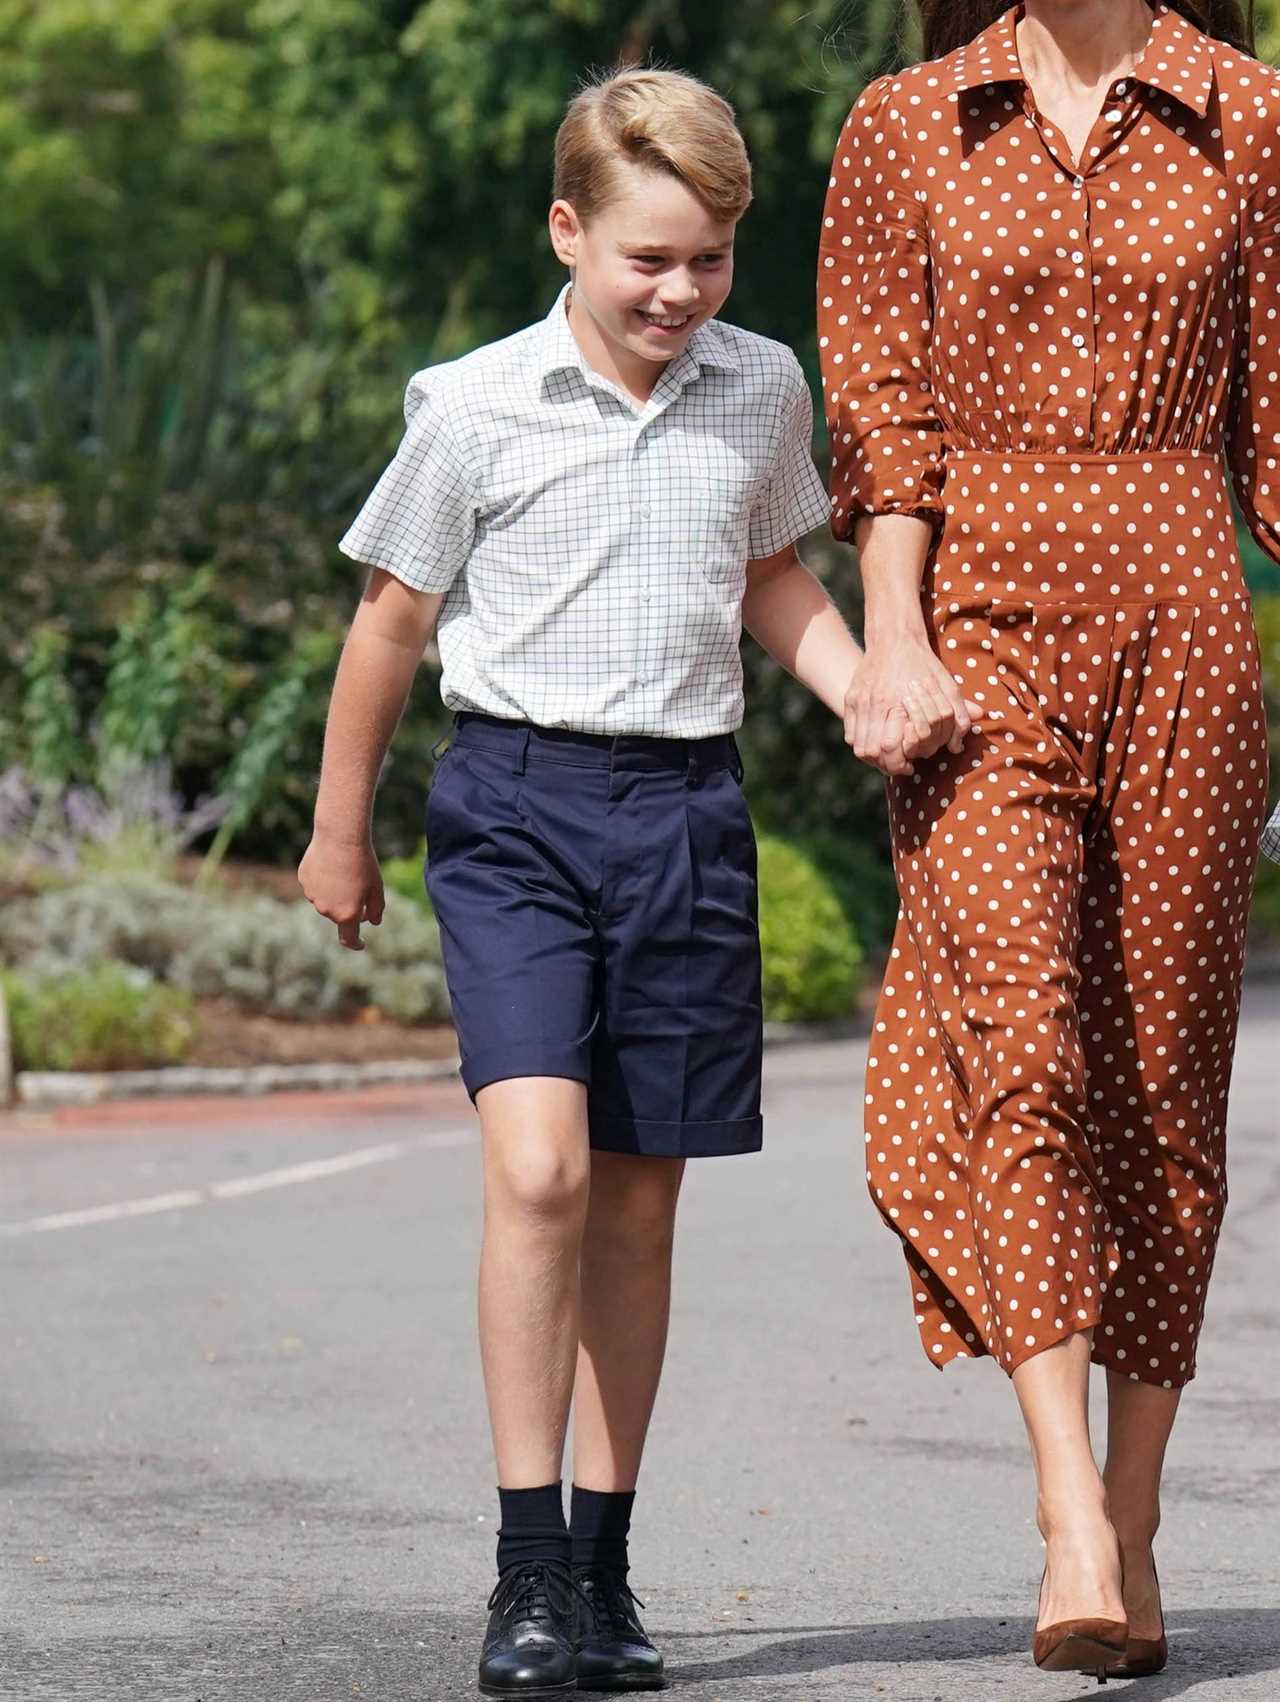 What are Prince George’s nicknames and what do Kate Middleton and Prince William call him?